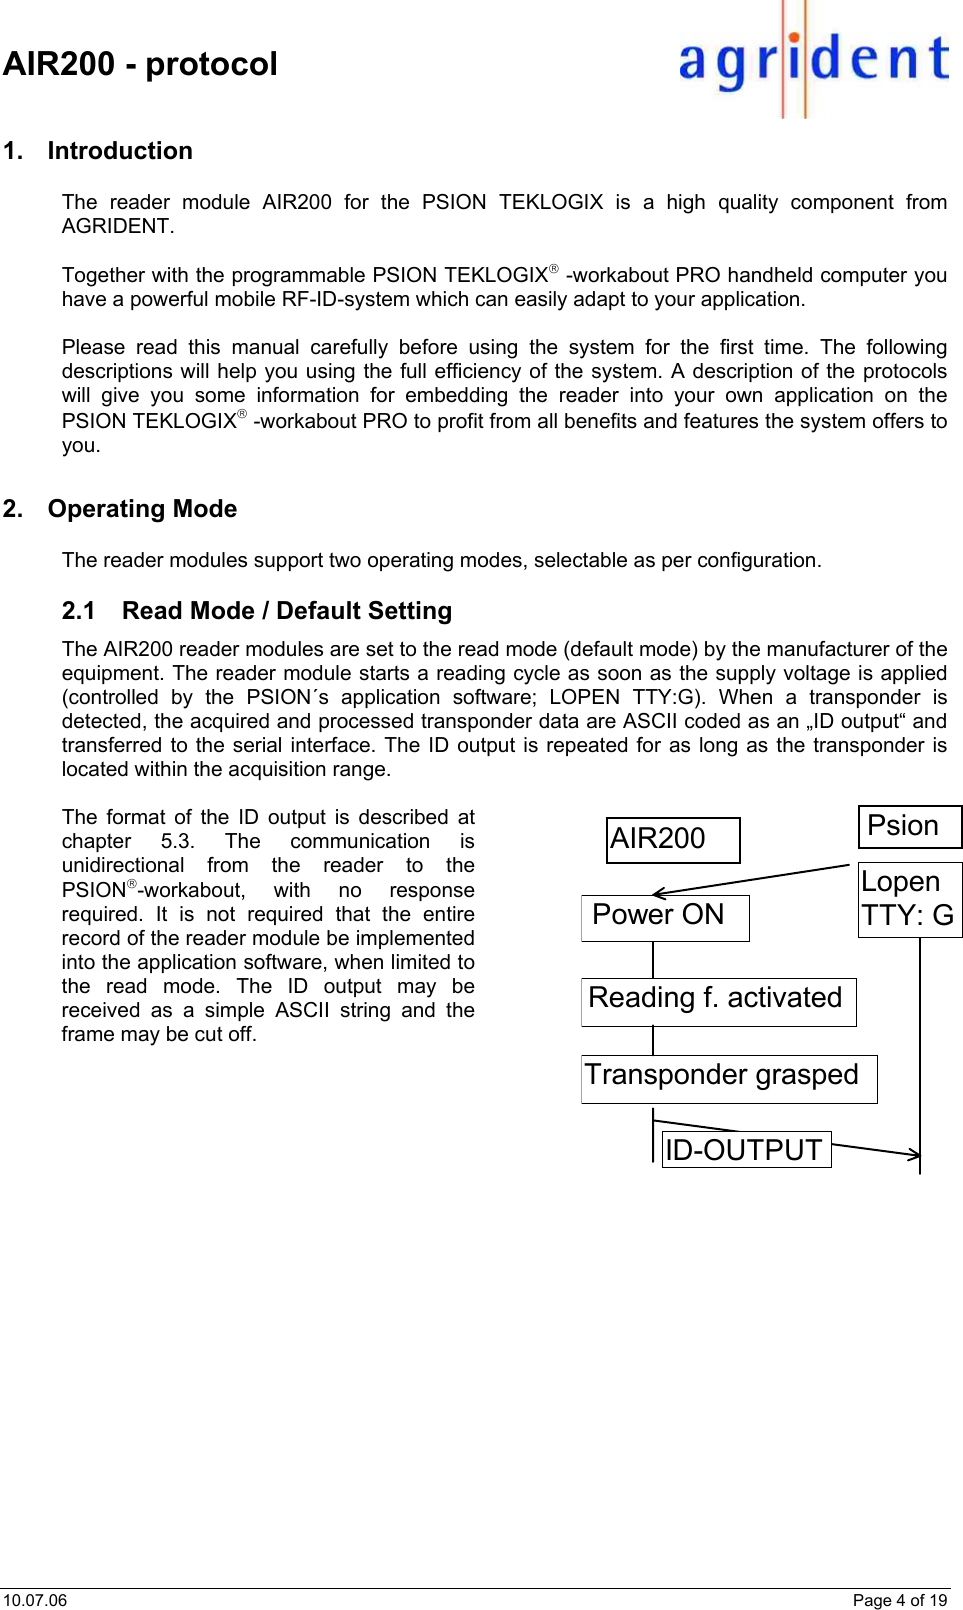    AIR200 - protocol  10.07.06    Page 4 of 19 1. Introduction The reader module AIR200 for the PSION TEKLOGIX is a high quality component from AGRIDENT.  Together with the programmable PSION TEKLOGIX -workabout PRO handheld computer you have a powerful mobile RF-ID-system which can easily adapt to your application.  Please read this manual carefully before using the system for the first time. The following descriptions will help you using the full efficiency of the system. A description of the protocols will give you some information for embedding the reader into your own application on the PSION TEKLOGIX -workabout PRO to profit from all benefits and features the system offers to you. 2. Operating Mode The reader modules support two operating modes, selectable as per configuration.  2.1  Read Mode / Default Setting The AIR200 reader modules are set to the read mode (default mode) by the manufacturer of the equipment. The reader module starts a reading cycle as soon as the supply voltage is applied (controlled by the PSION´s application software; LOPEN TTY:G). When a transponder is detected, the acquired and processed transponder data are ASCII coded as an „ID output“ and transferred to the serial interface. The ID output is repeated for as long as the transponder is located within the acquisition range.   The format of the ID output is described at chapter 5.3. The communication is unidirectional from the reader to the PSION-workabout, with no response required. It is not required that the entire record of the reader module be implemented into the application software, when limited to the read mode. The ID output may be received as a simple ASCII string and the frame may be cut off.   Power ON AIR200  Psion  Reading f. activated ID-OUTPUT Lopen TTY: GTransponder grasped 